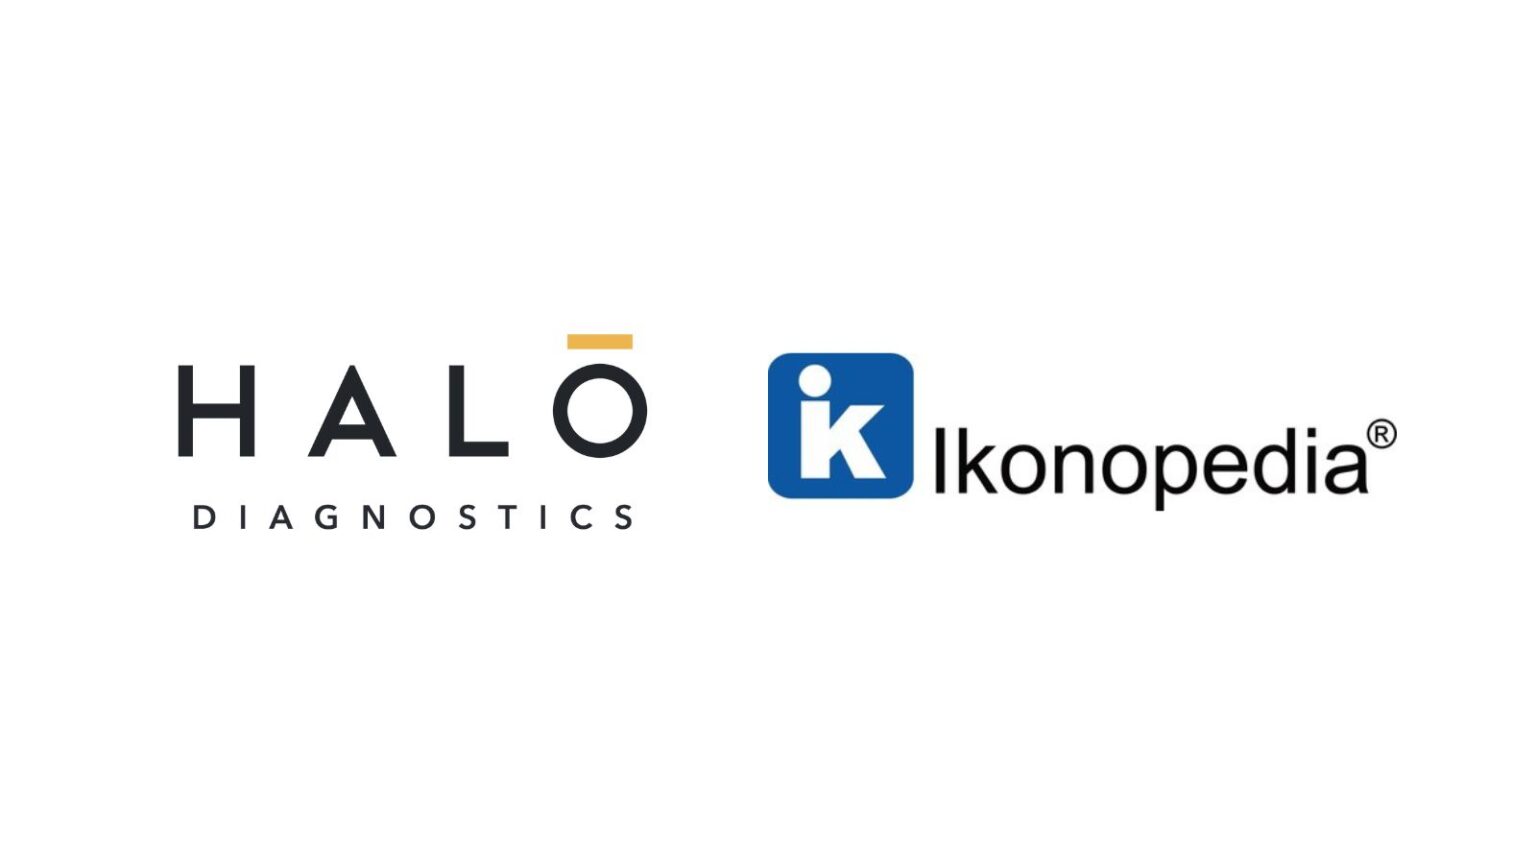 HALO Diagnostics and Ikonopedia logos side by side